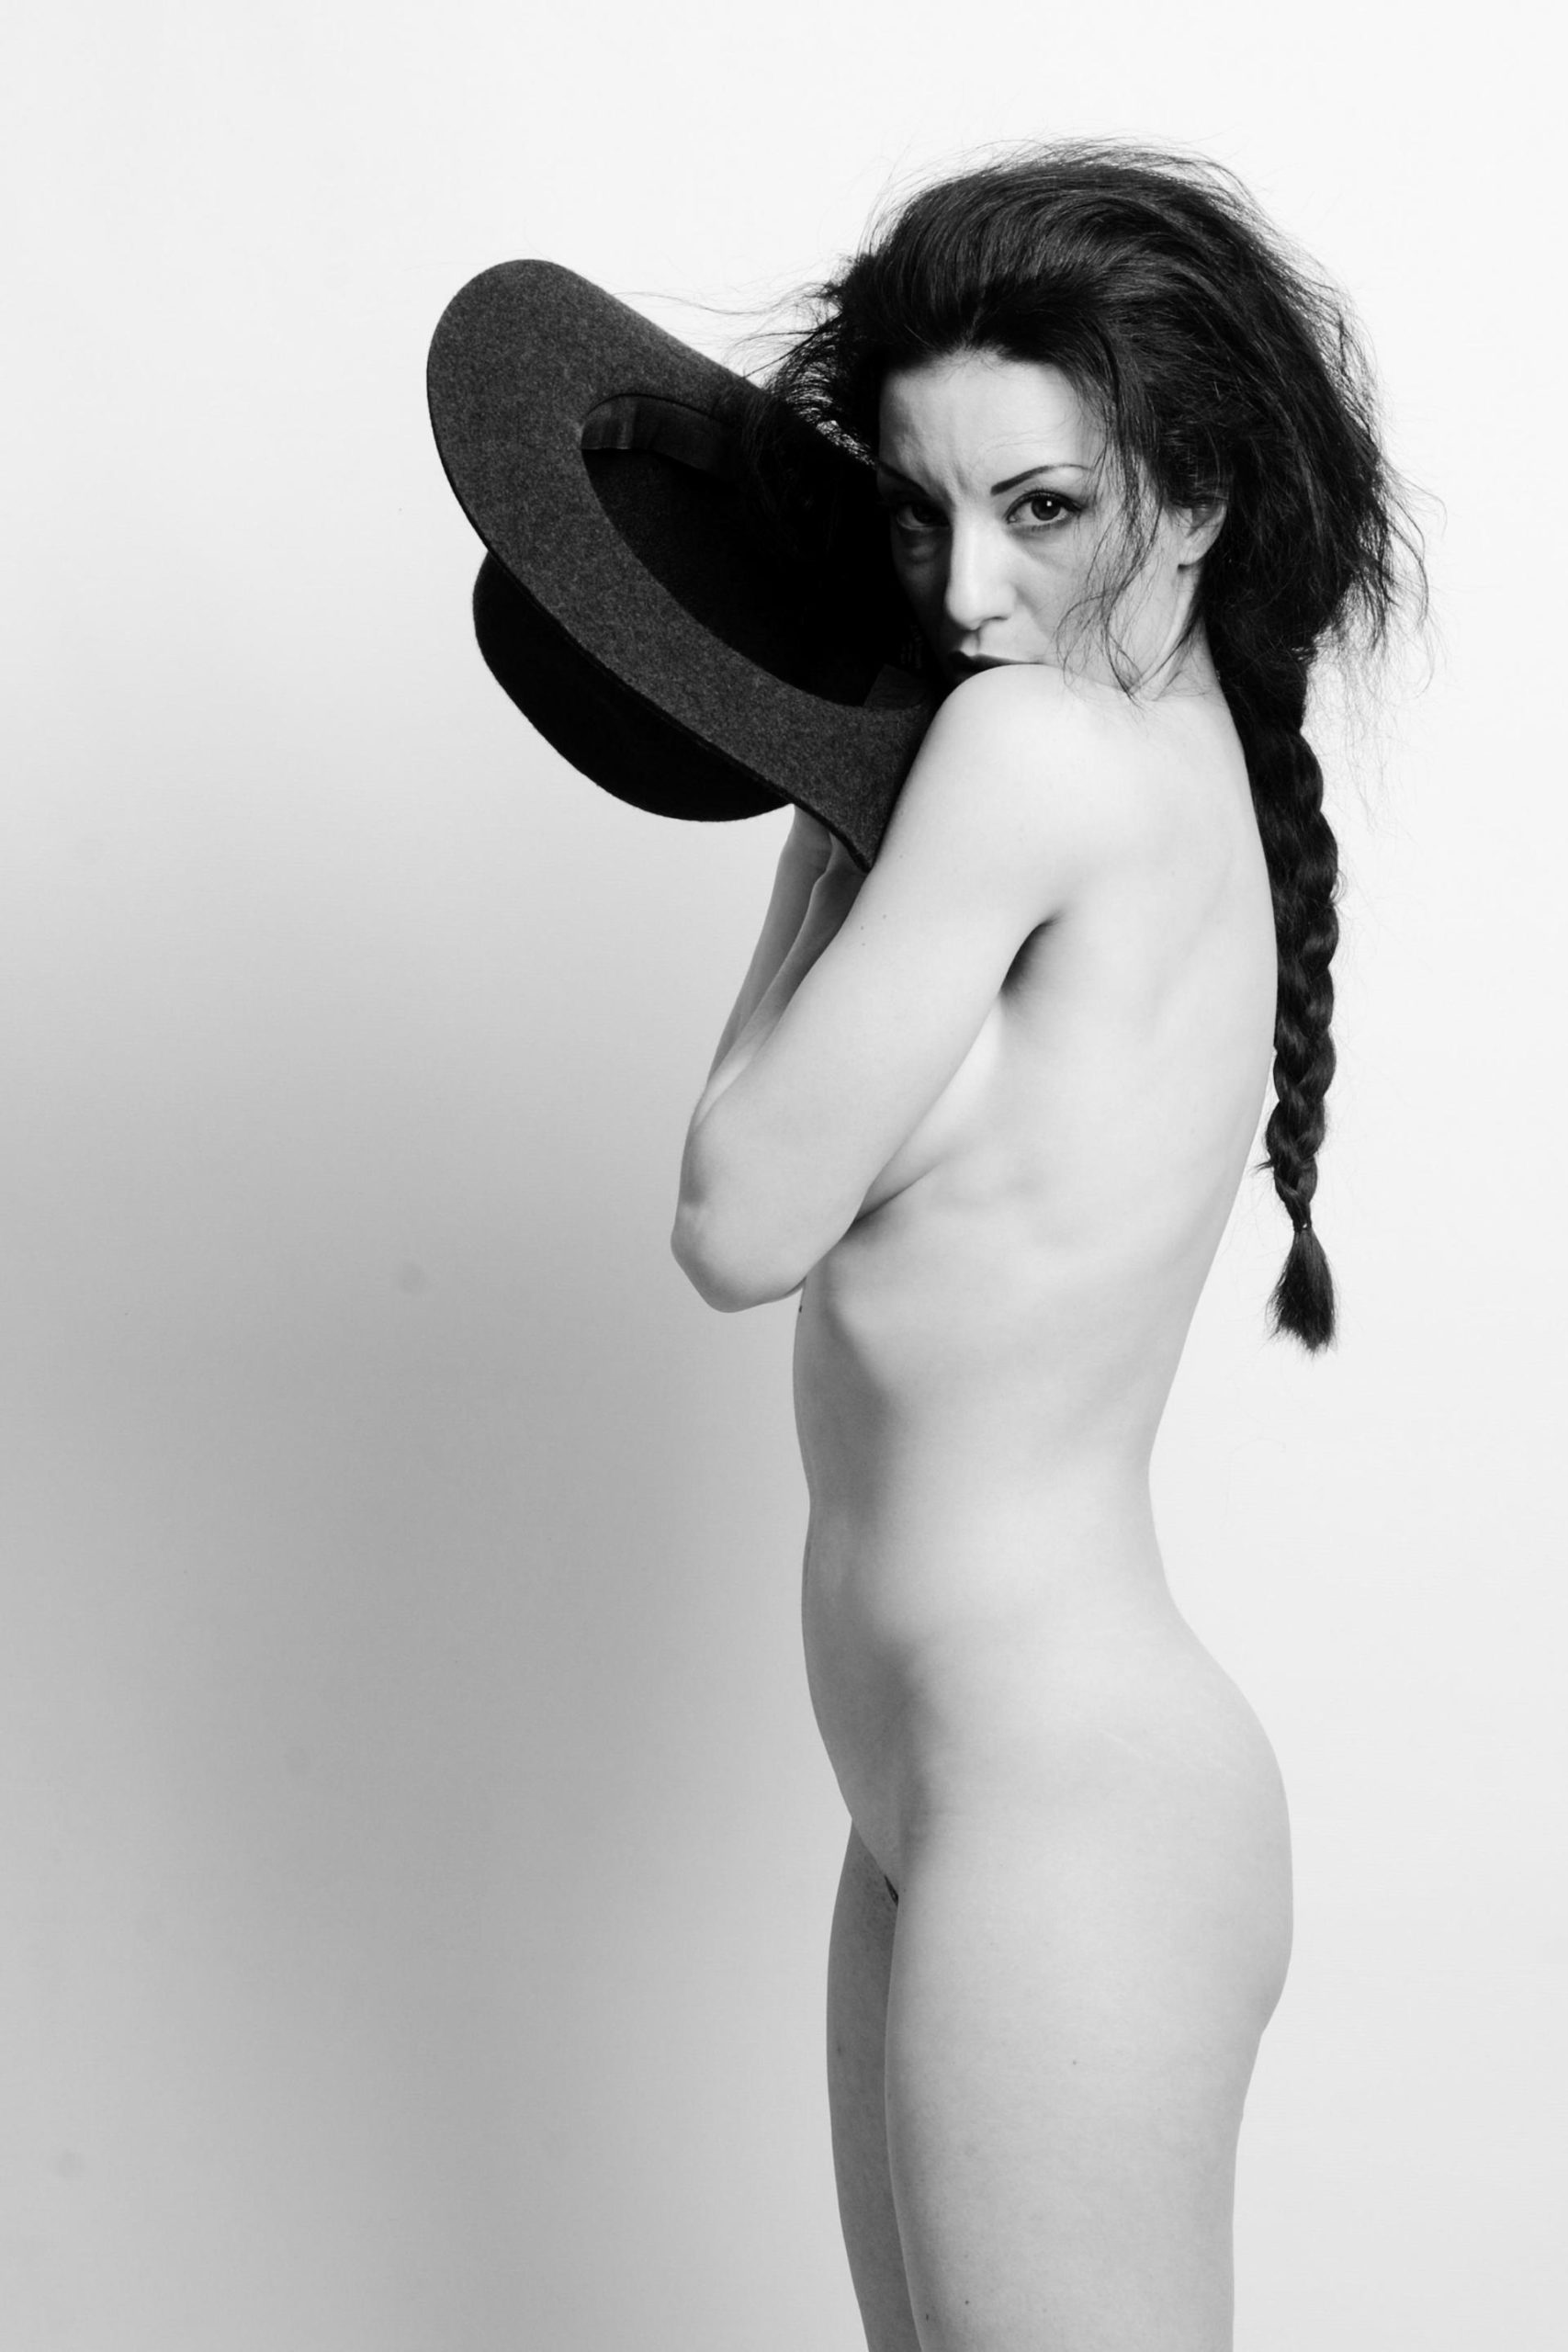 No Nude | 2020-12 | Charmer woman with hat | giovannipasiniphoto.com